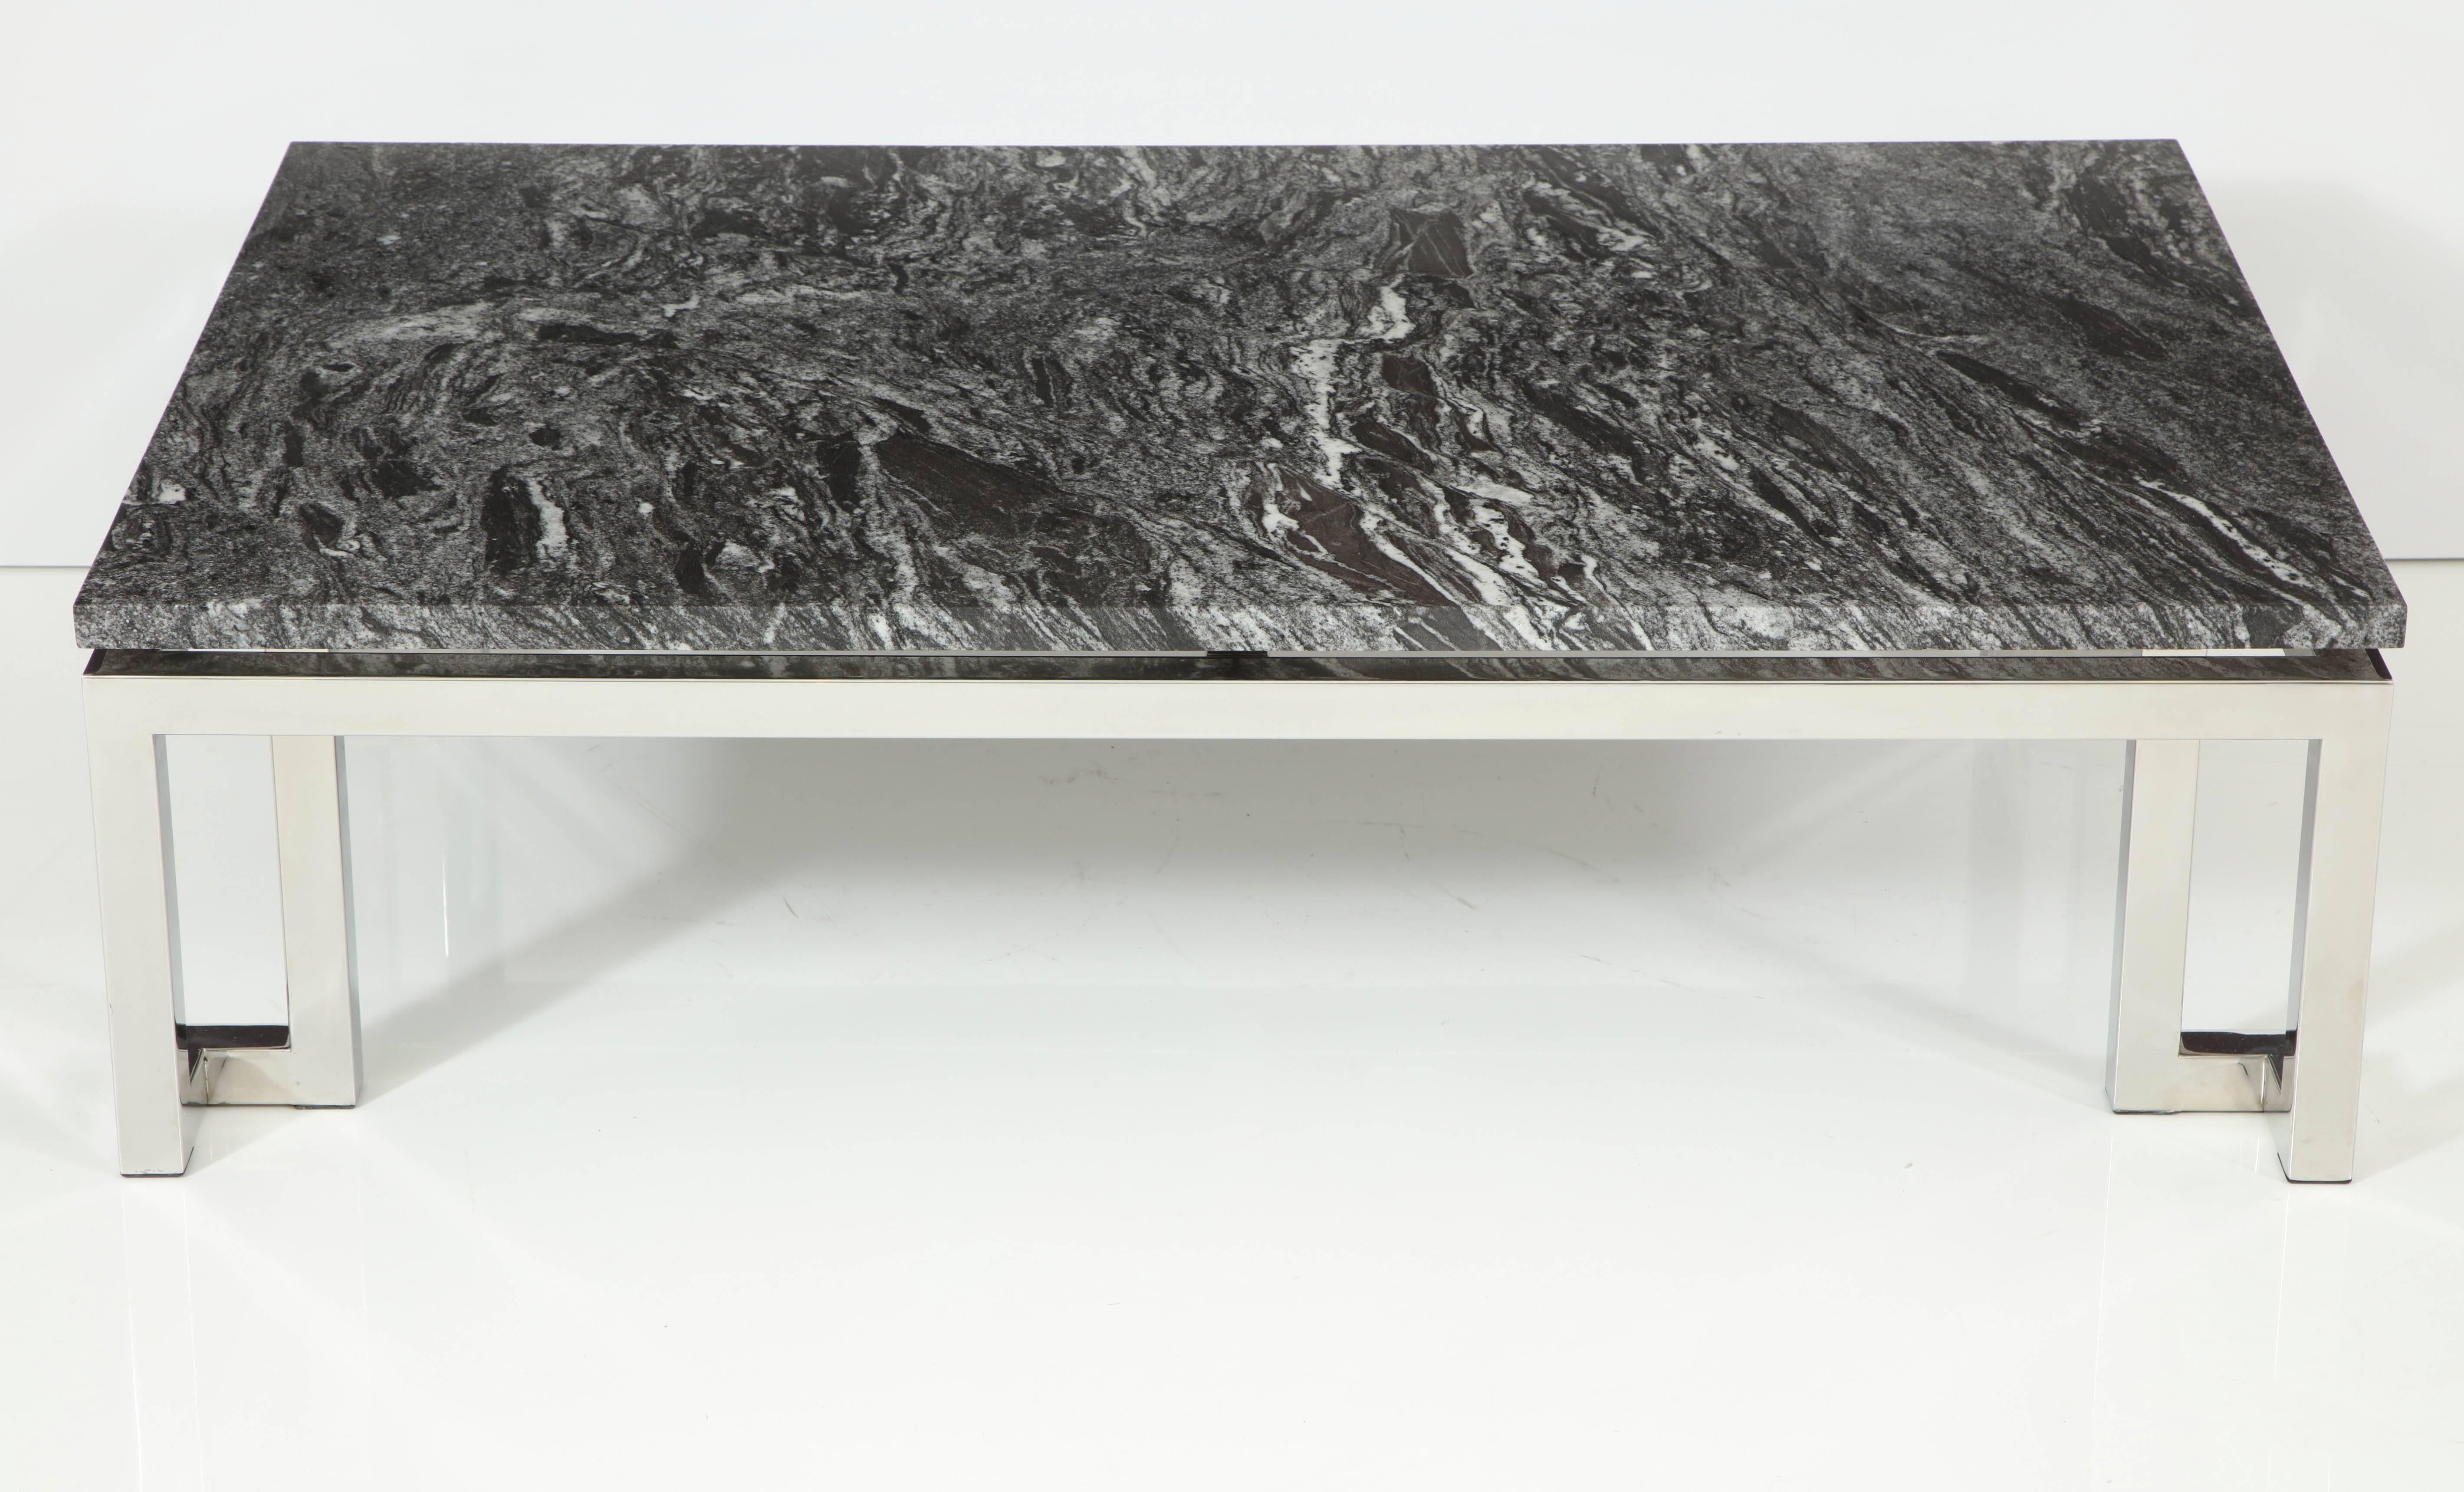 Elegant polished chrome Greek key influenced coffee table. 
The beautiful granite top floats on top of the base.